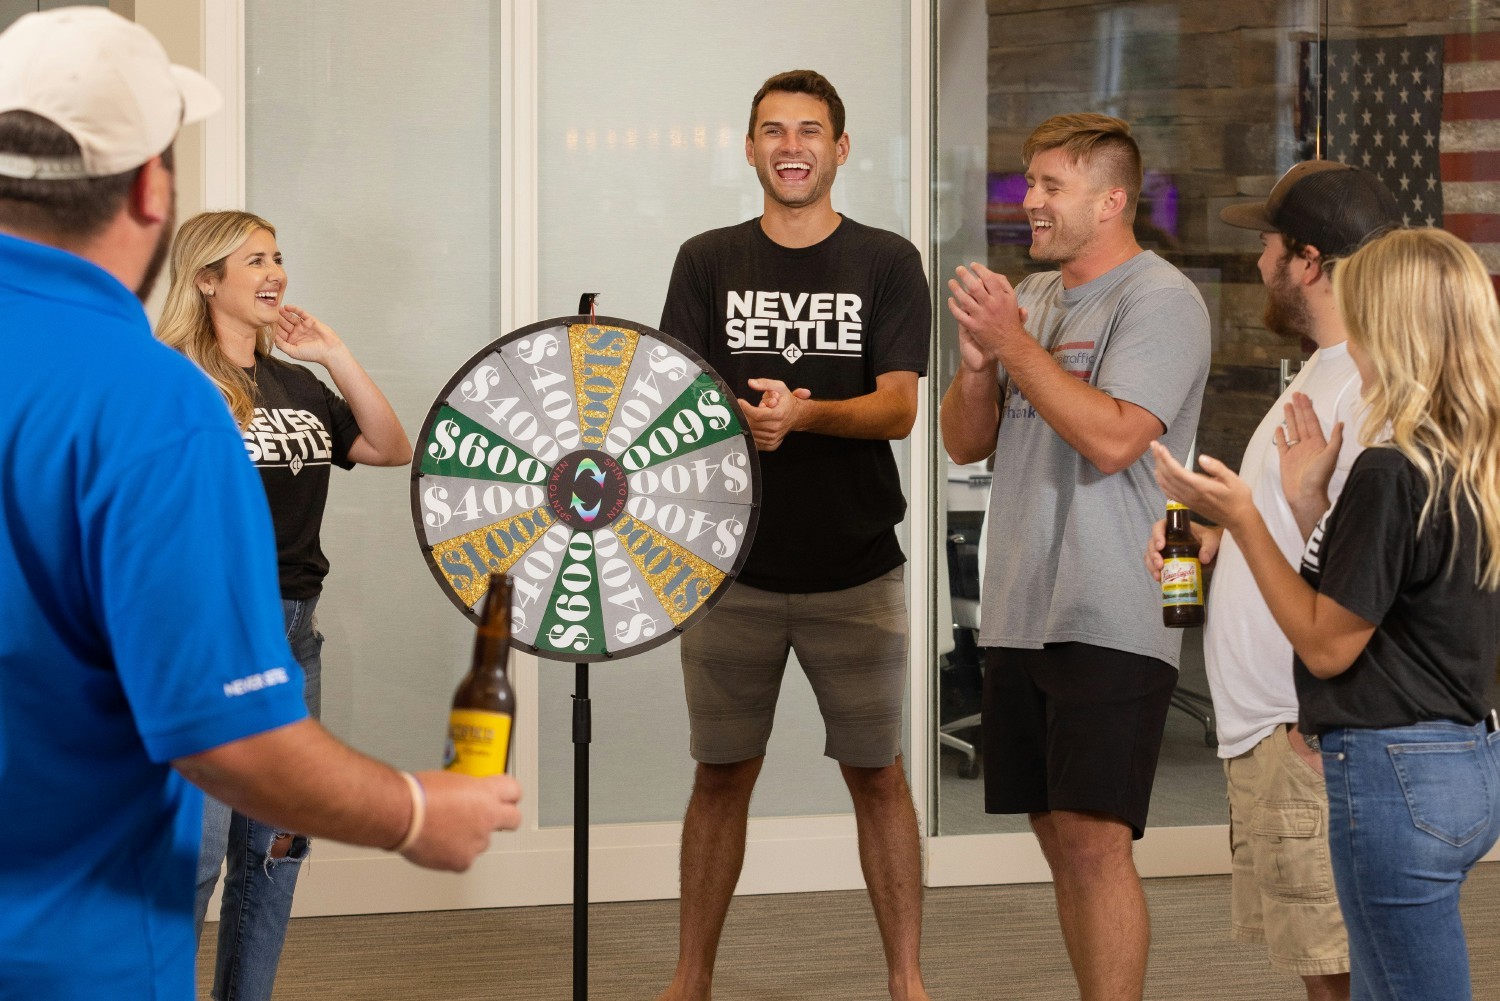 One of great perks at CT is our Friday wheel spins where employees can win between $400 to $1000 for their sales efforts